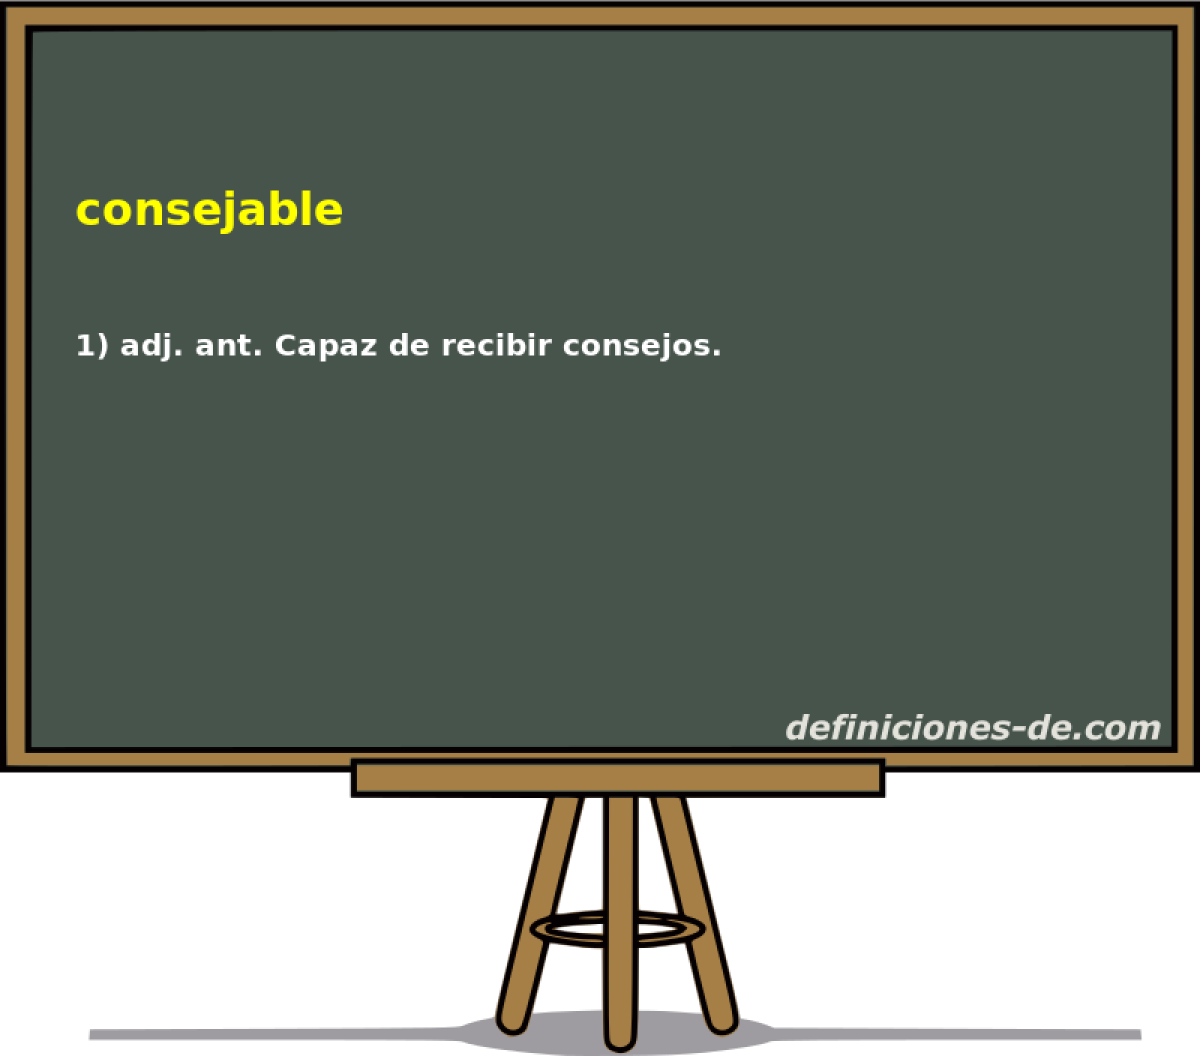 consejable 